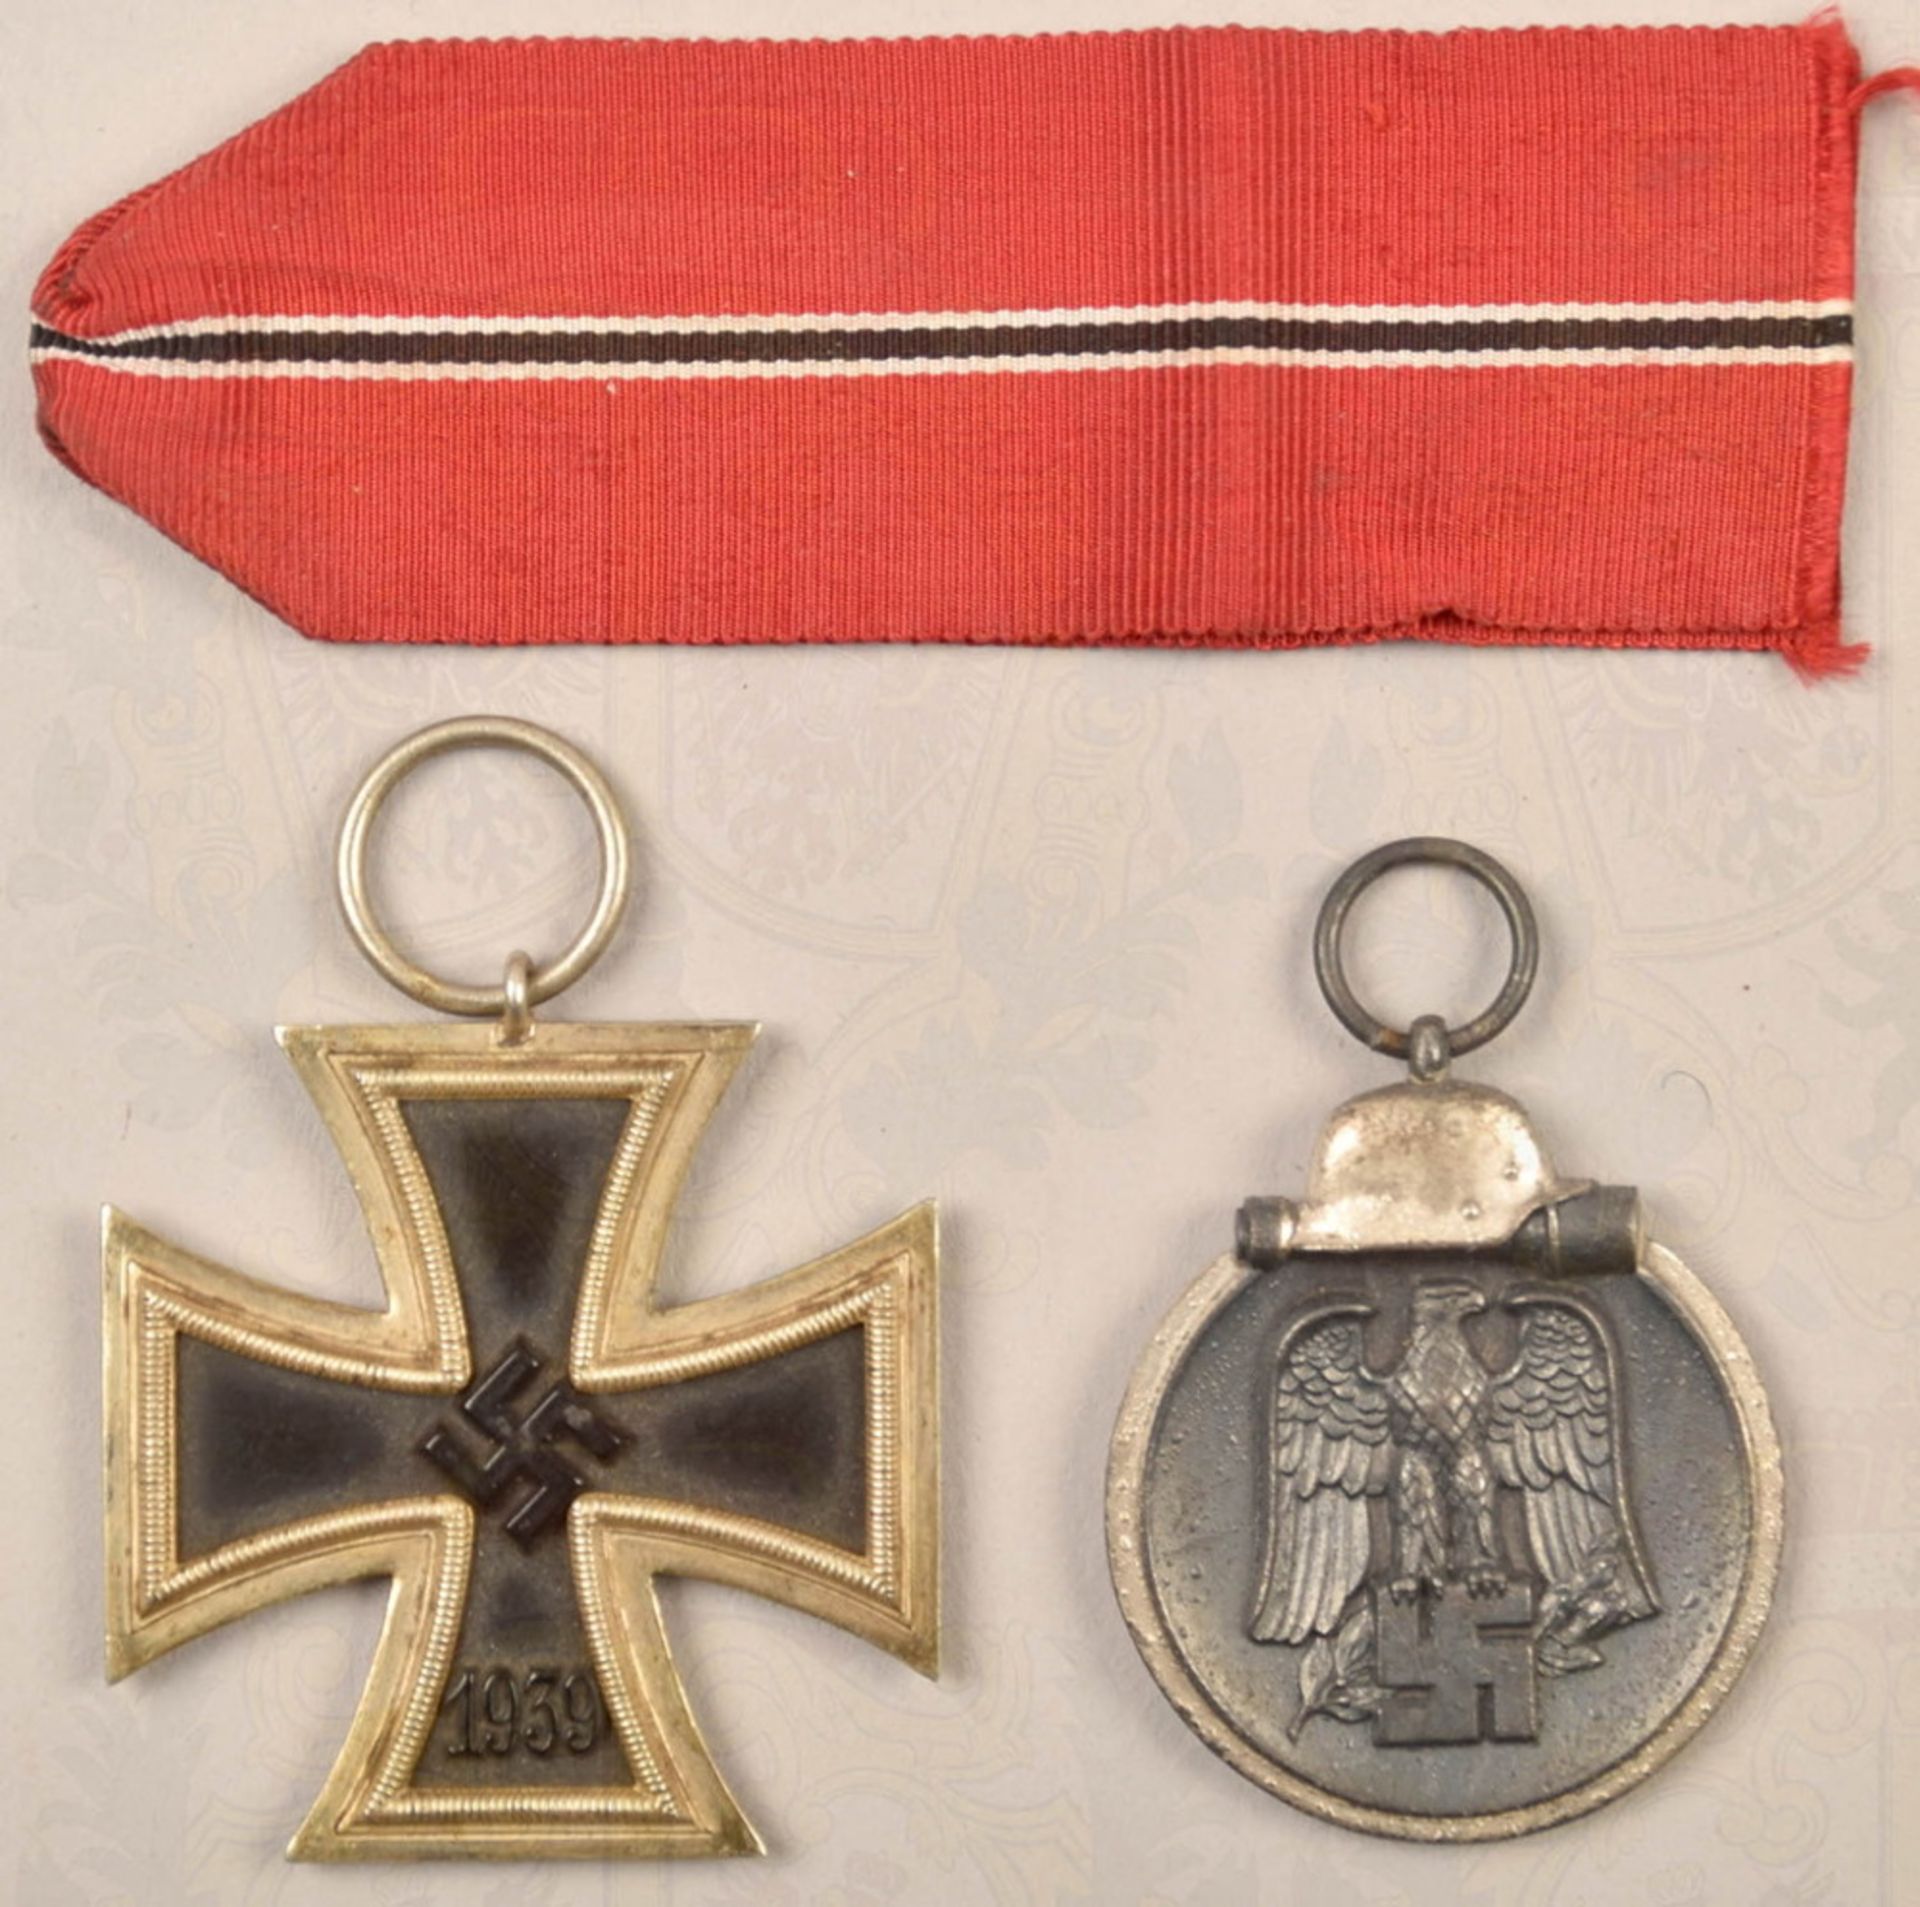 Iron Cross 2nd Class 1939 and Eastern Medal 1941 - Image 2 of 3